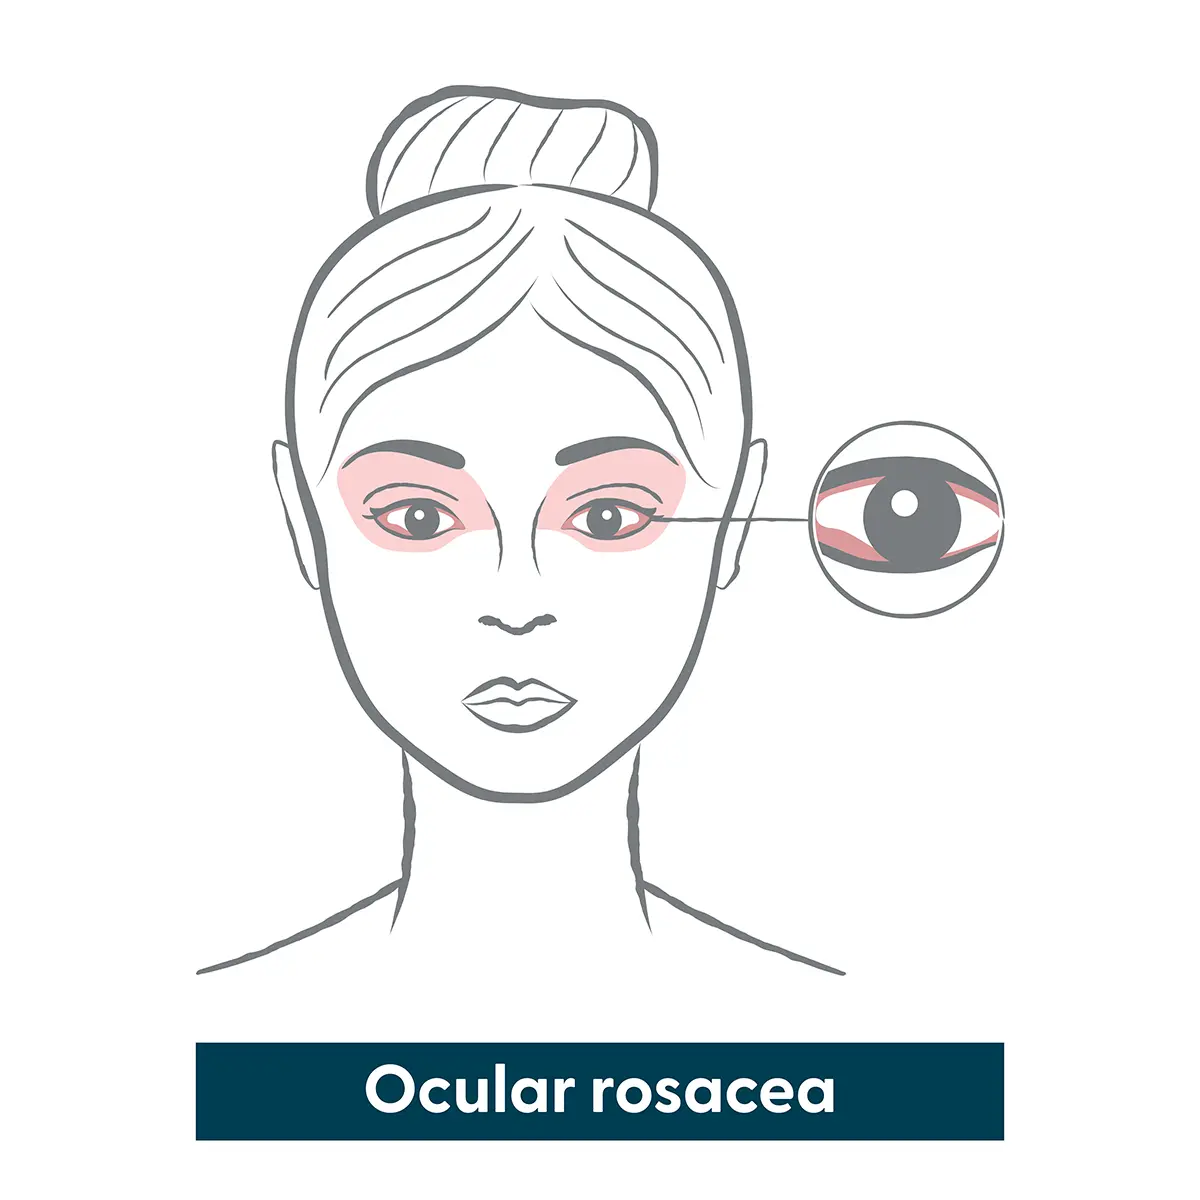 infographic of ocular rosacea